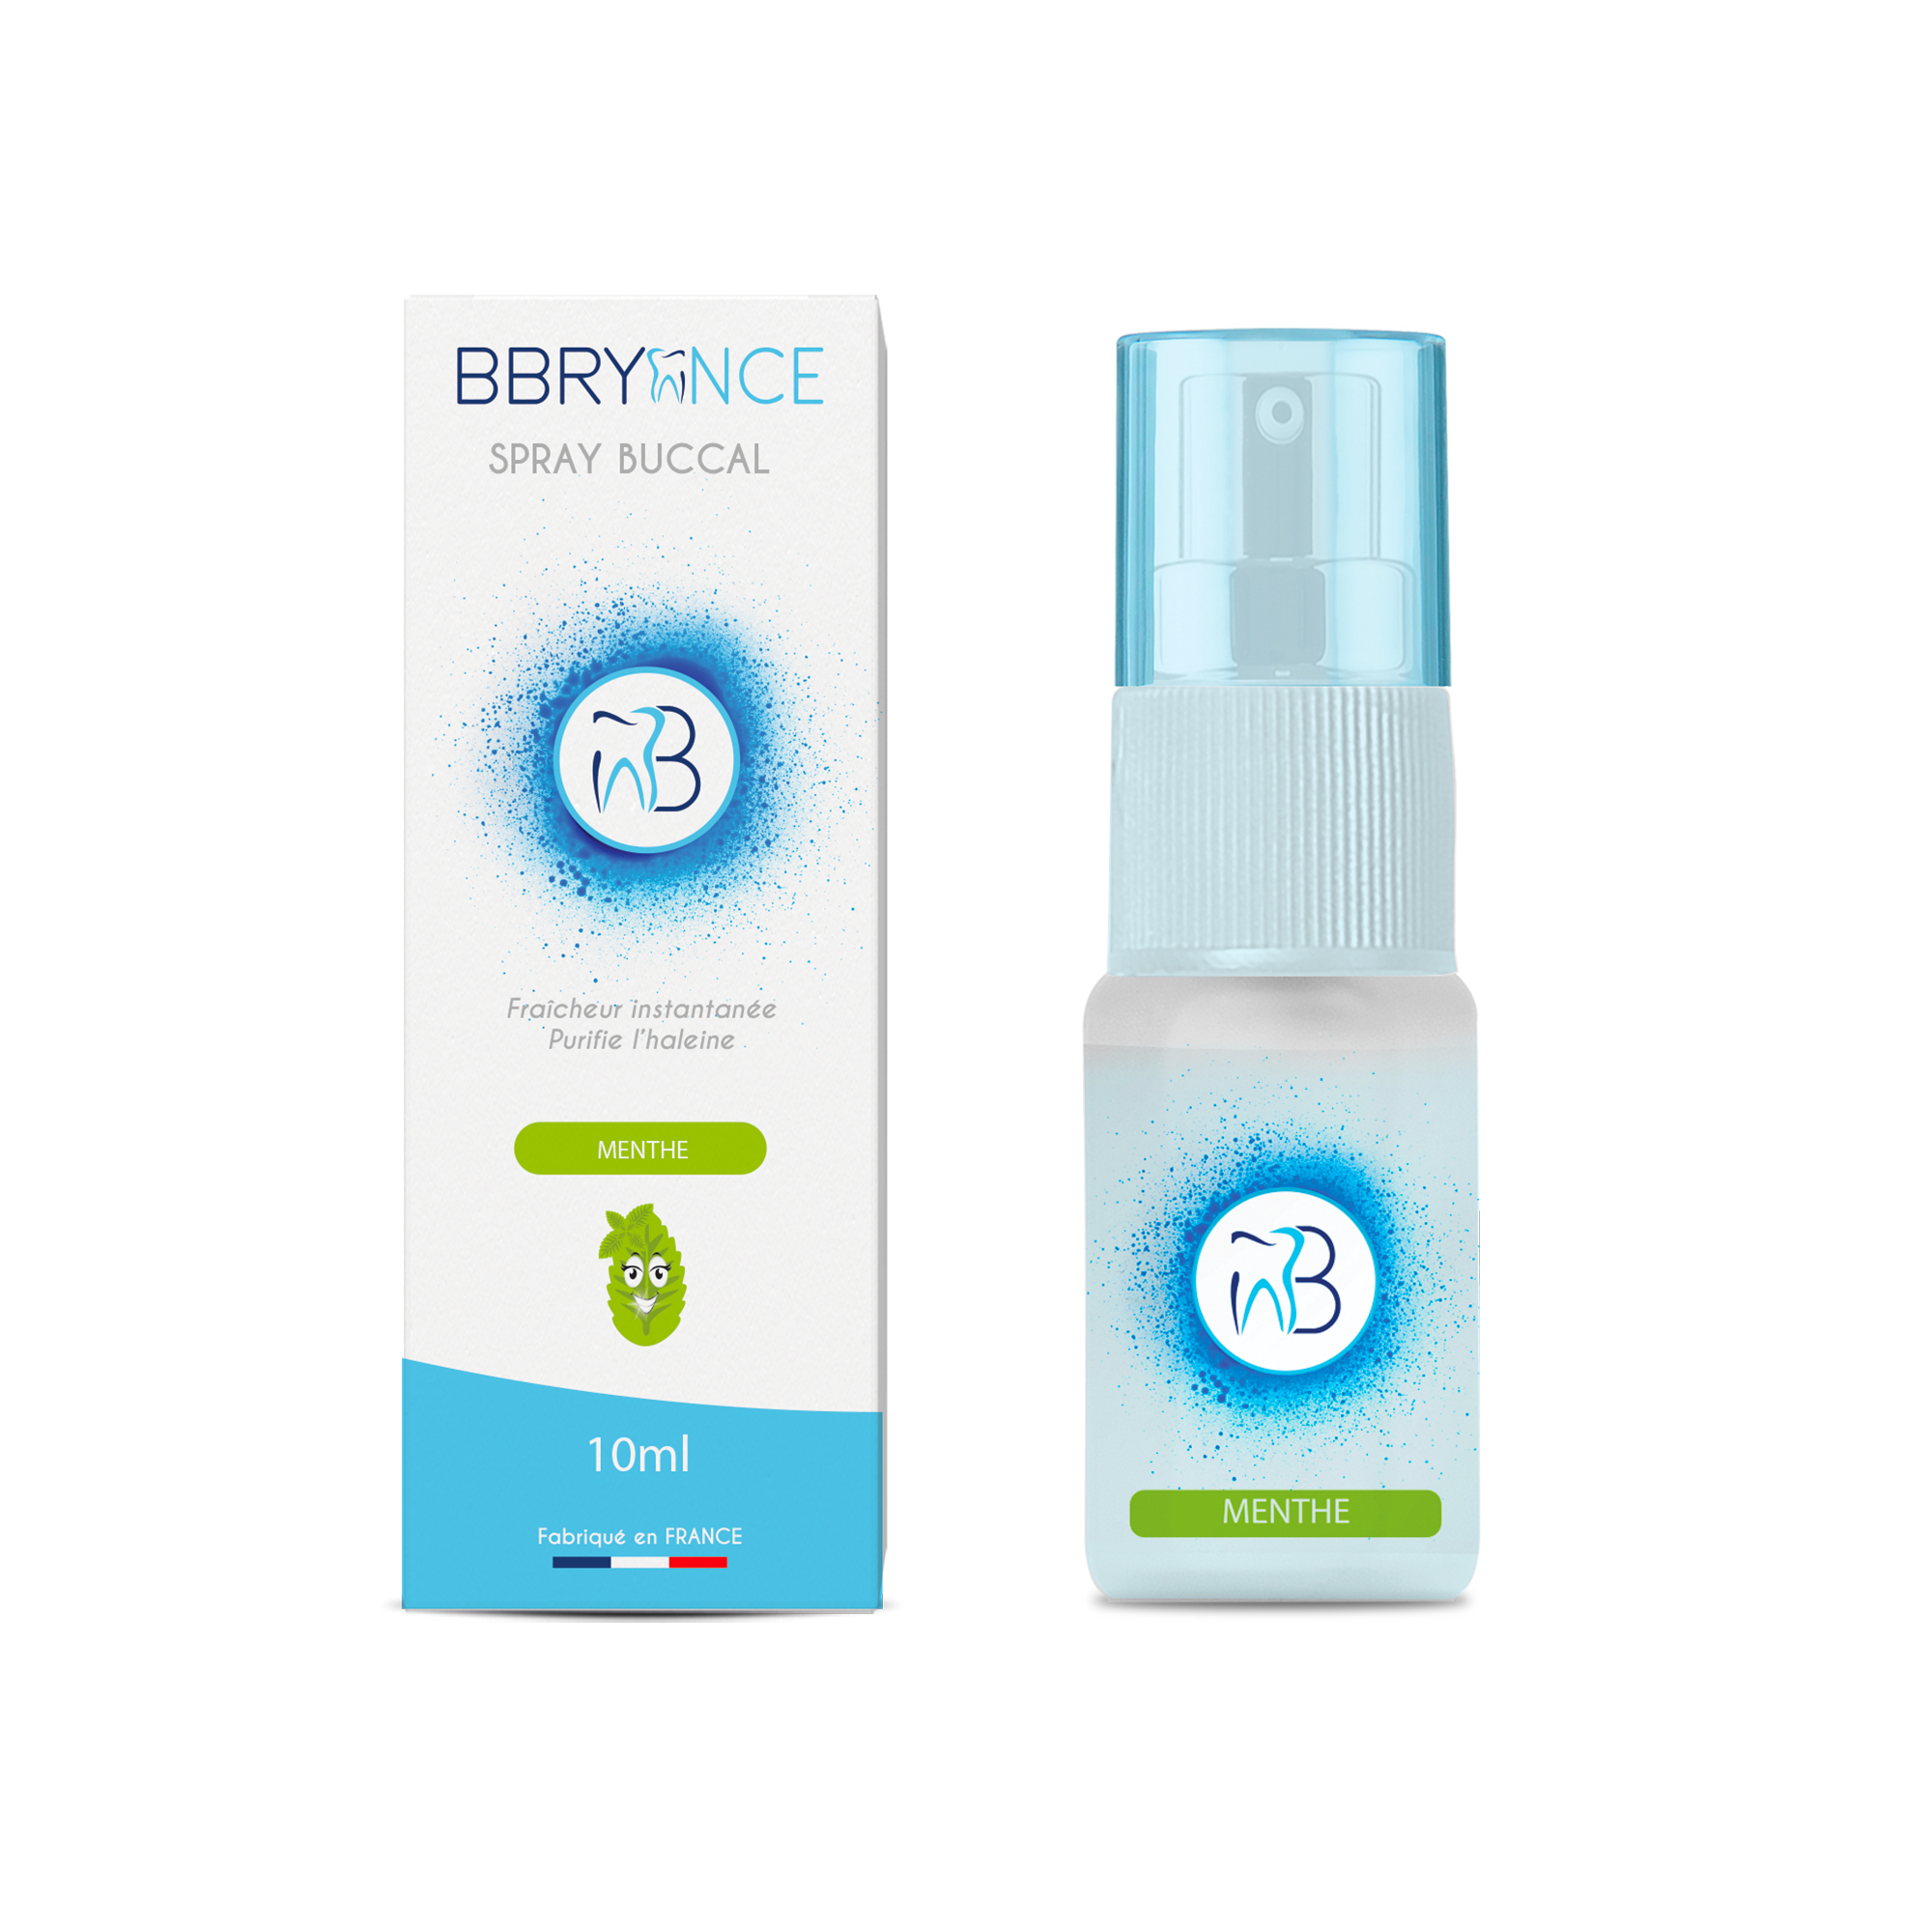 SPRAY BUCCAL MENTHE – Kit Blanchiment Dentaire BBRYANCE ©